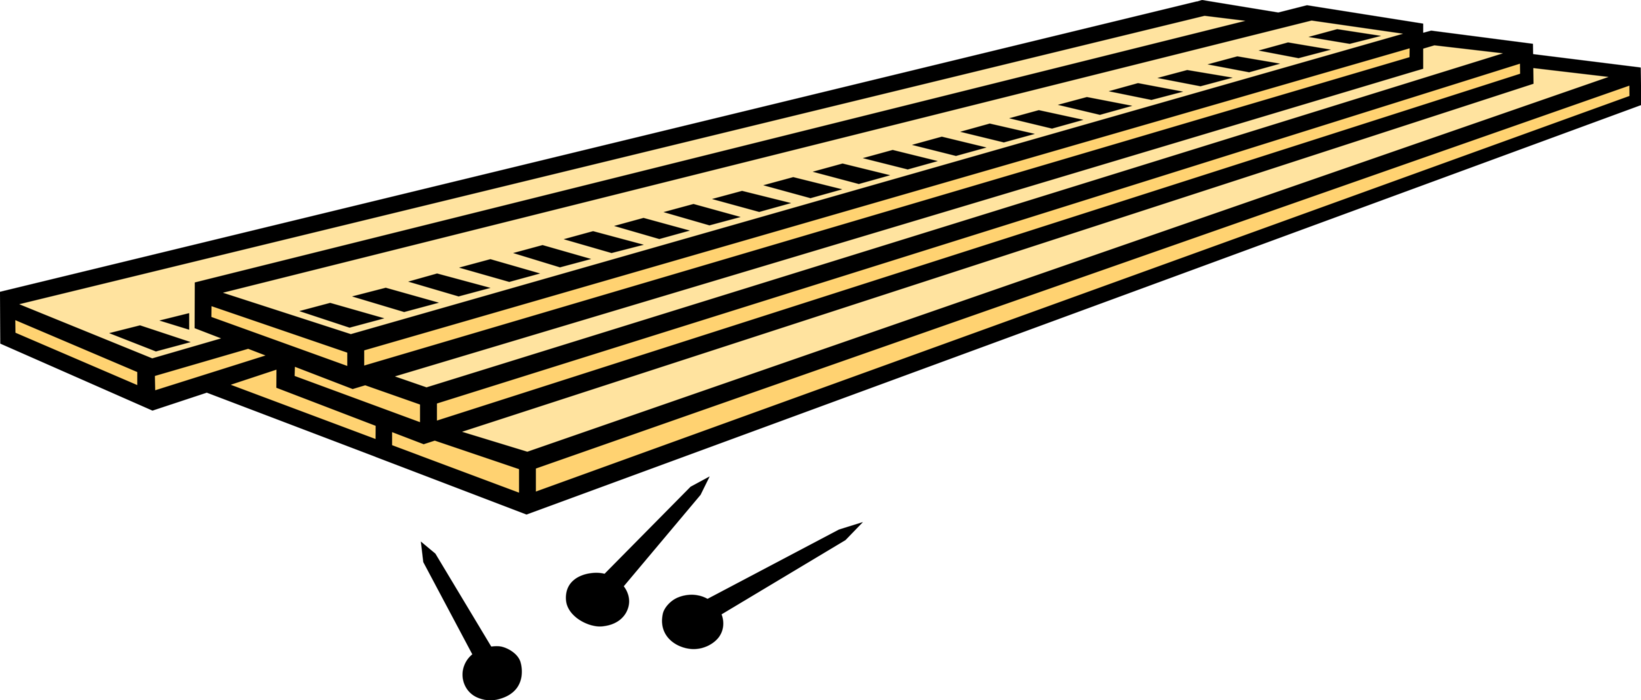 Vector Illustration of Wood Lumber Boards and Nails used in Carpentry and Construction